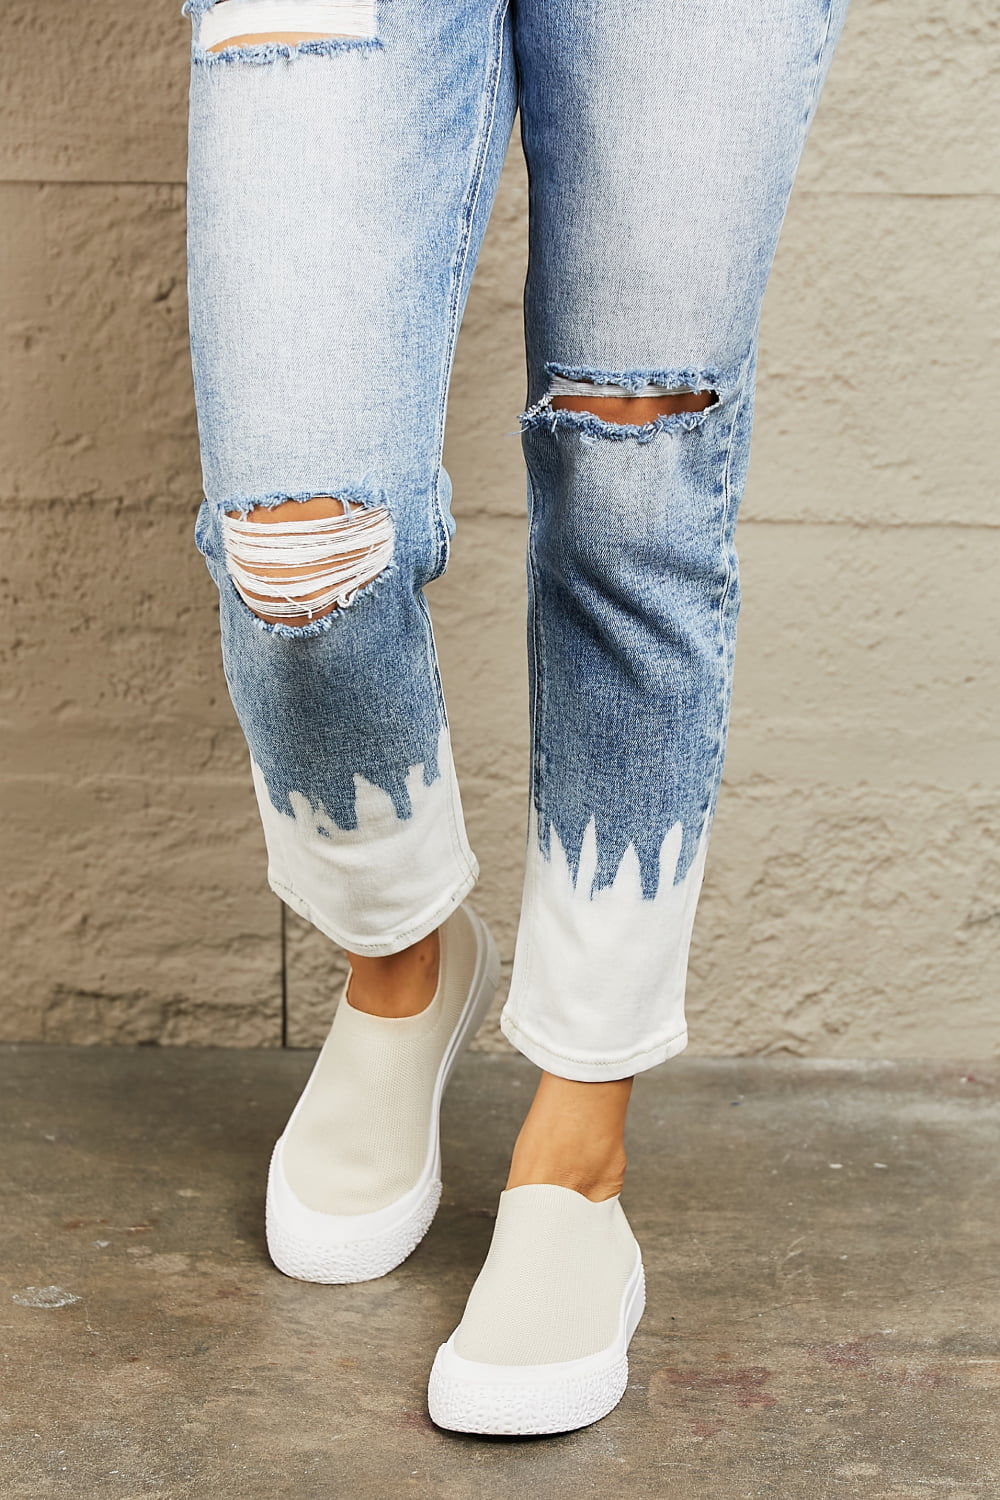 BAYEAS High Waisted Distressed Painted Cropped Skinny Jeans - Tigbul's Fashion